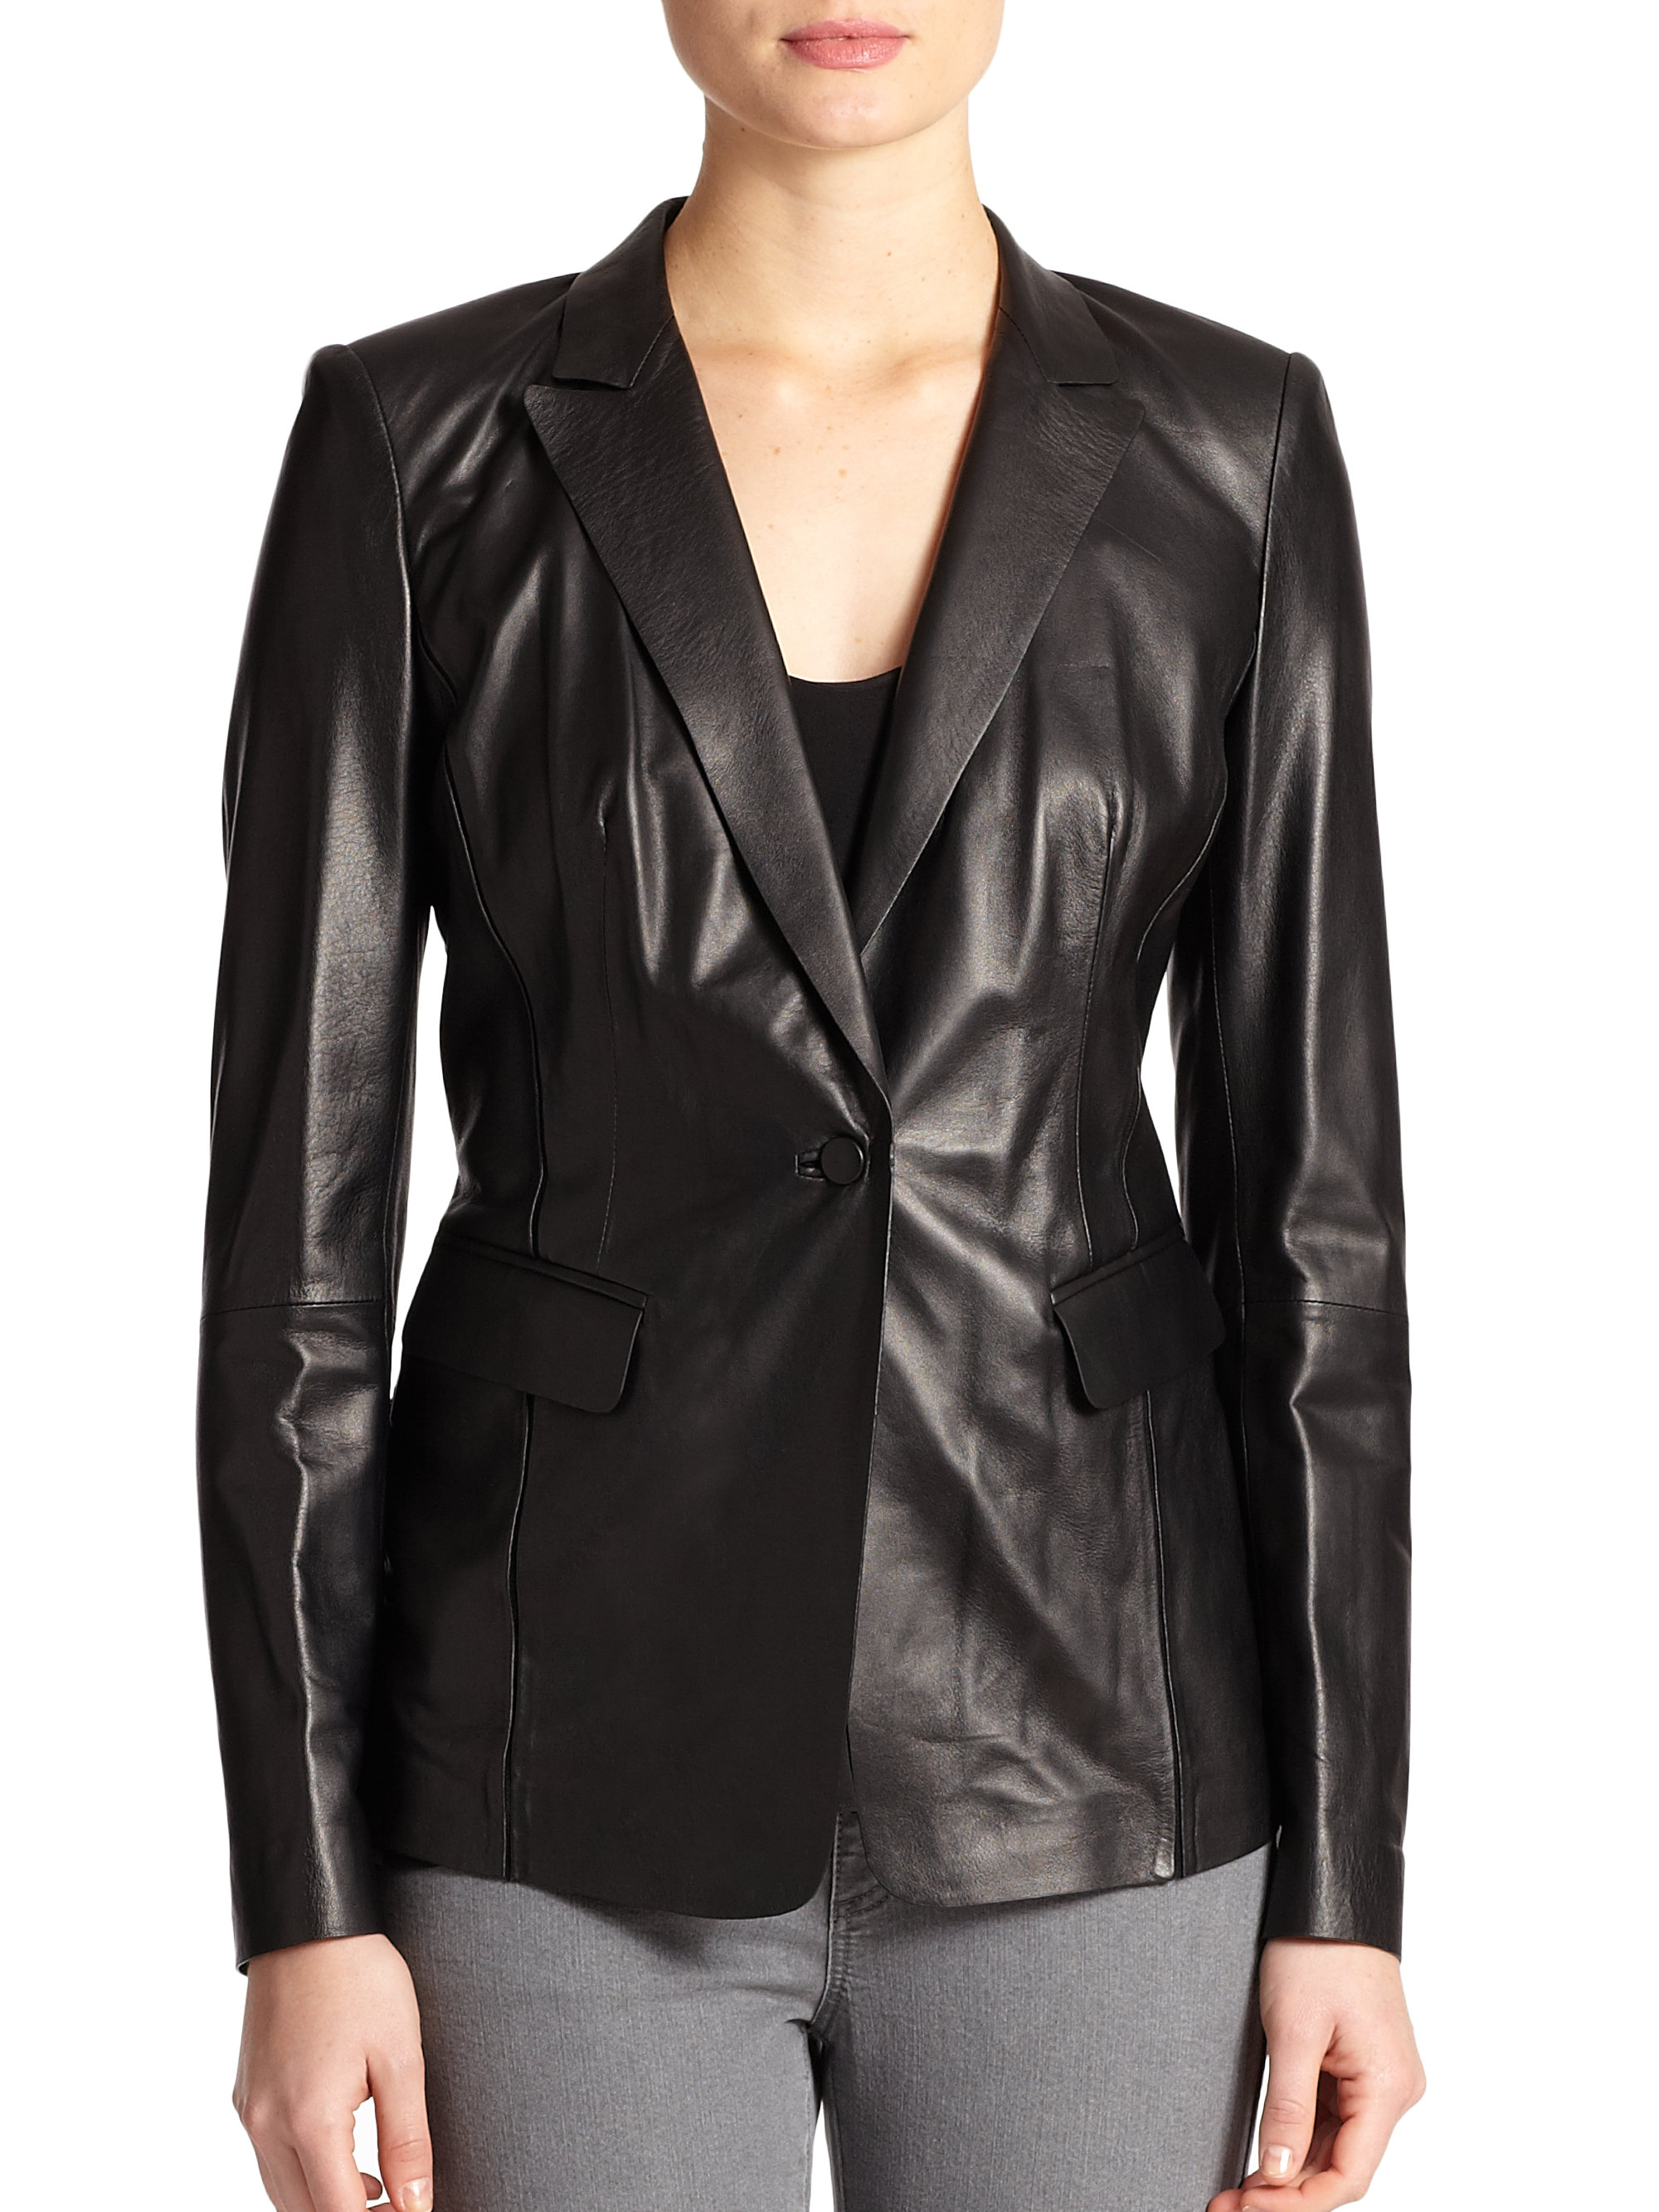 Lyst - Lafayette 148 New York Leather Lace-Back Jacket in Black